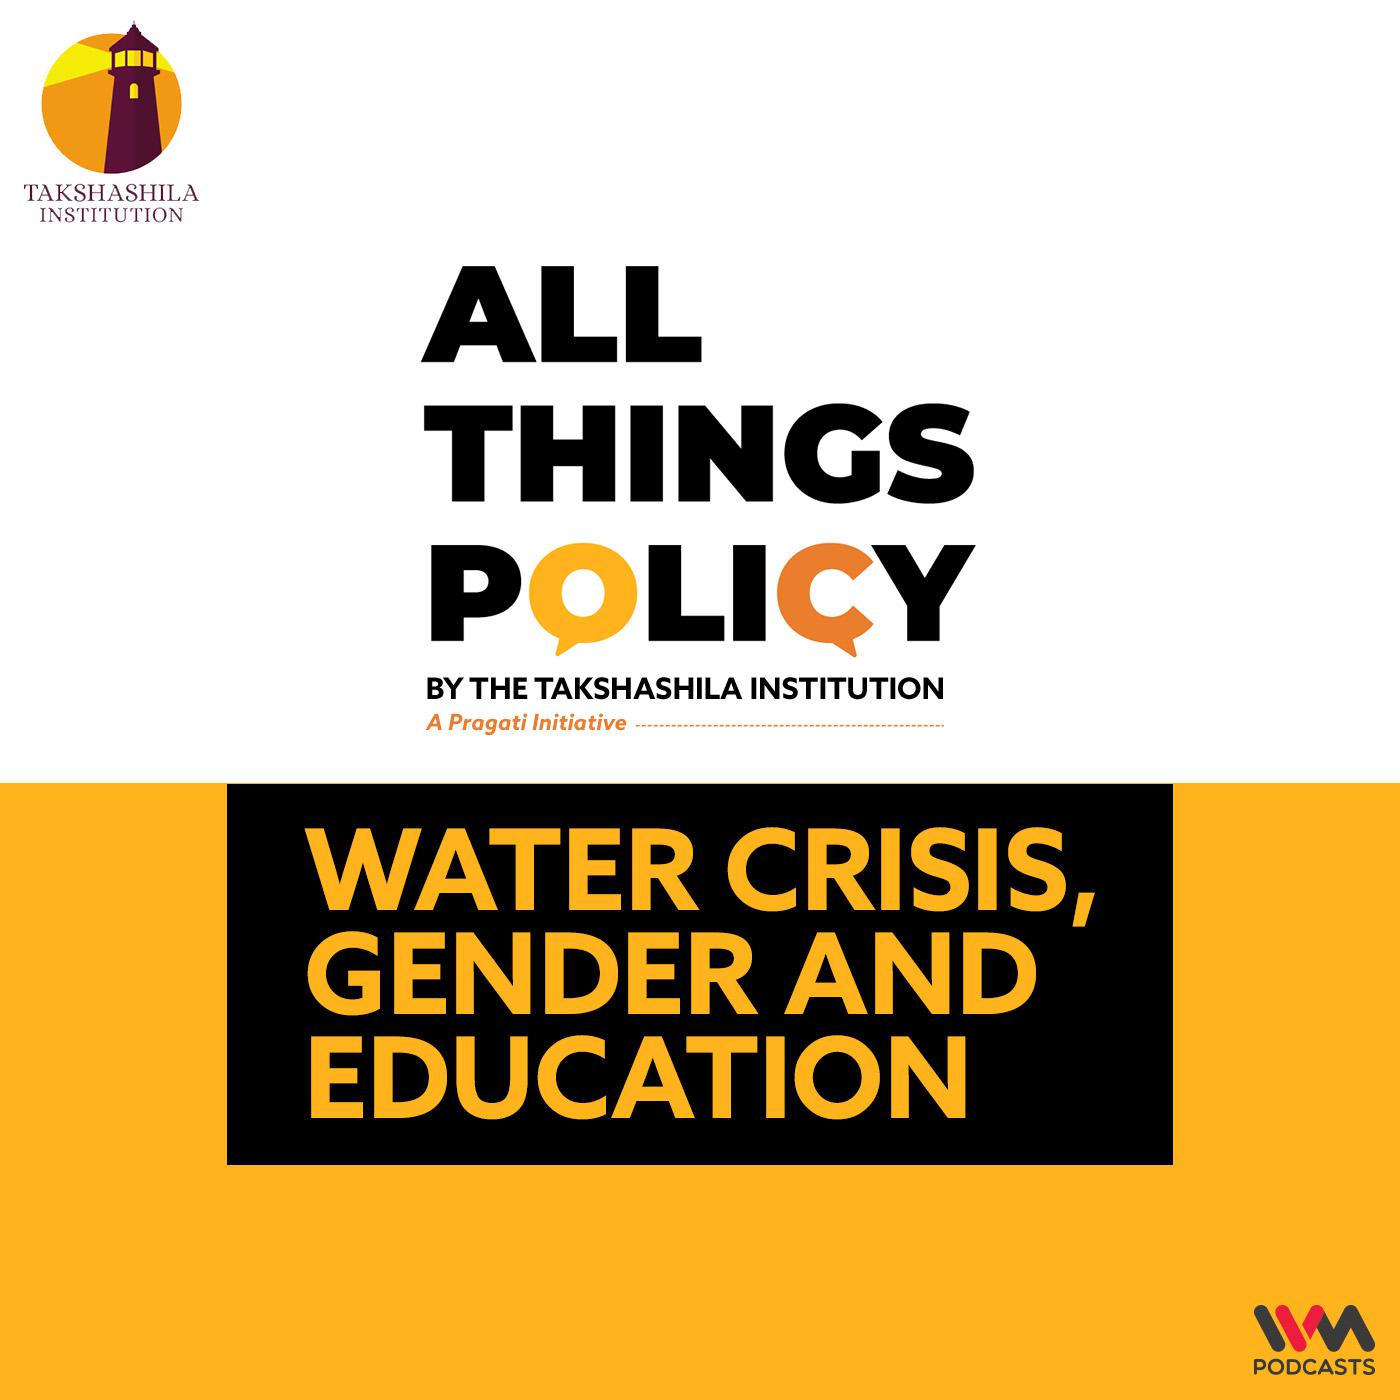 Water Crisis, Gender and Education